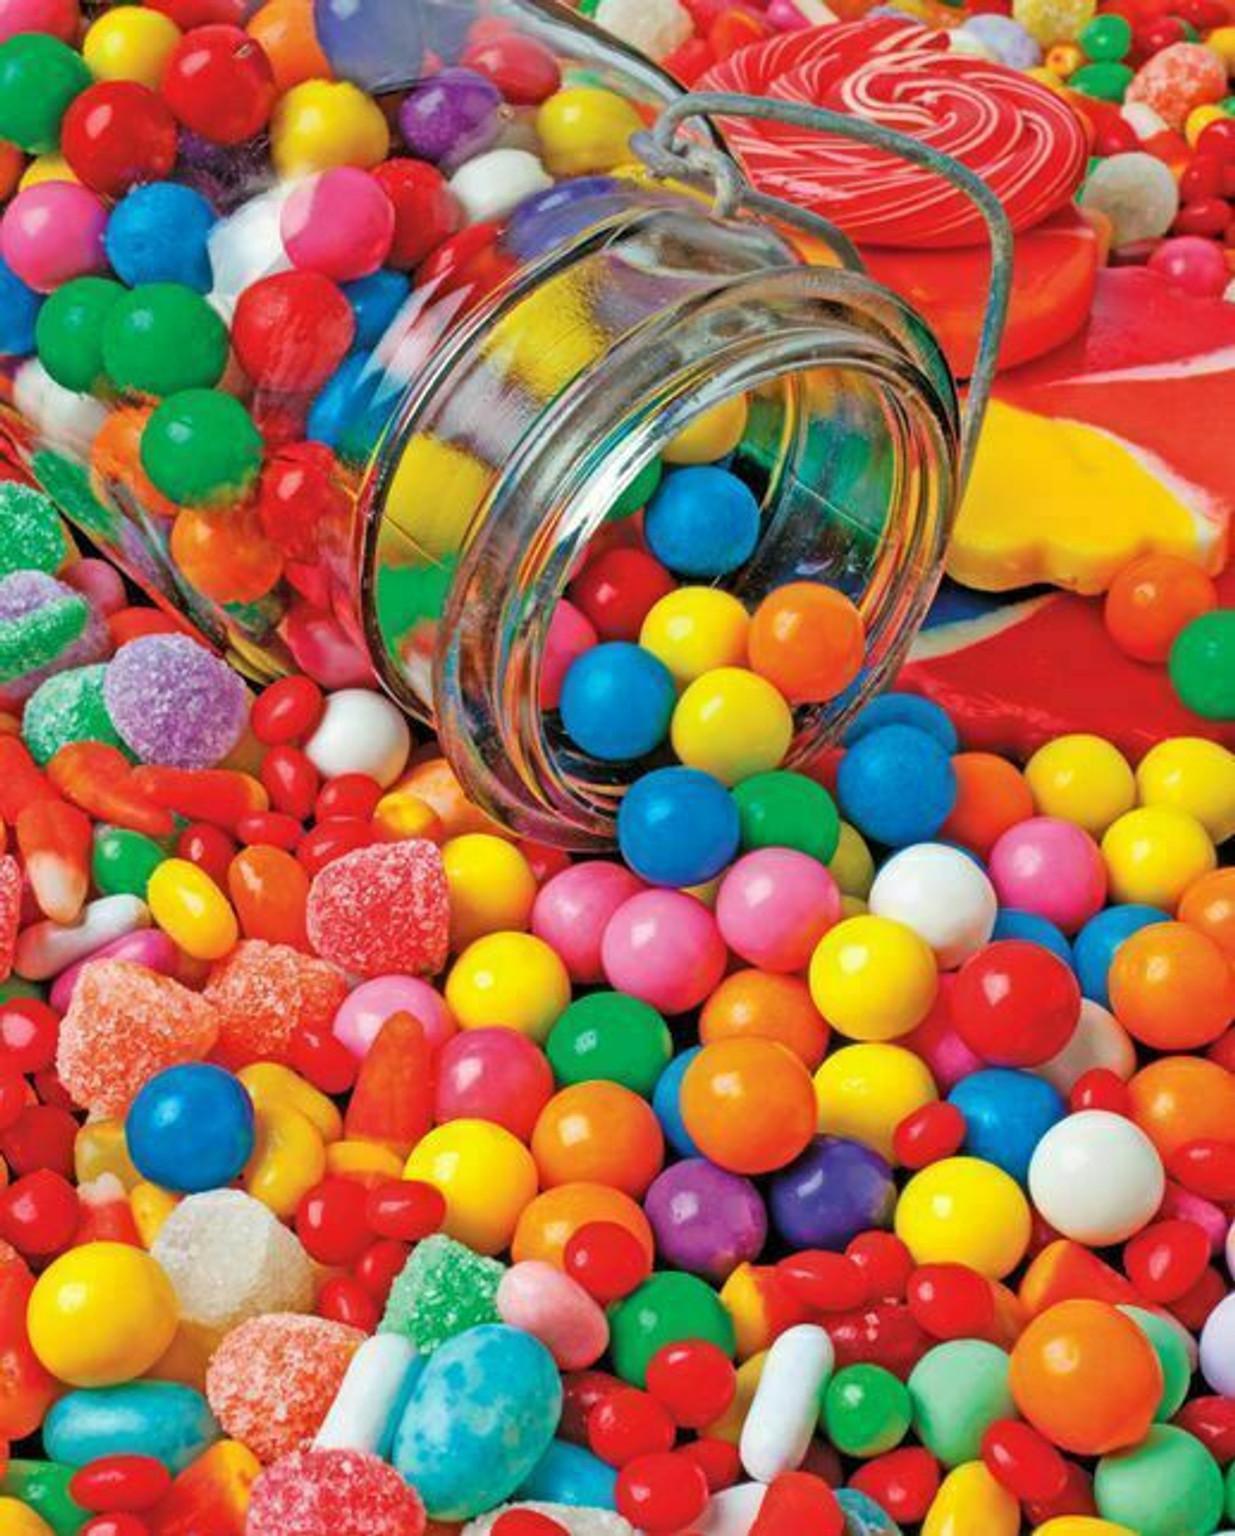 Gumballs & Gumdrops Food and Drink Jigsaw Puzzle